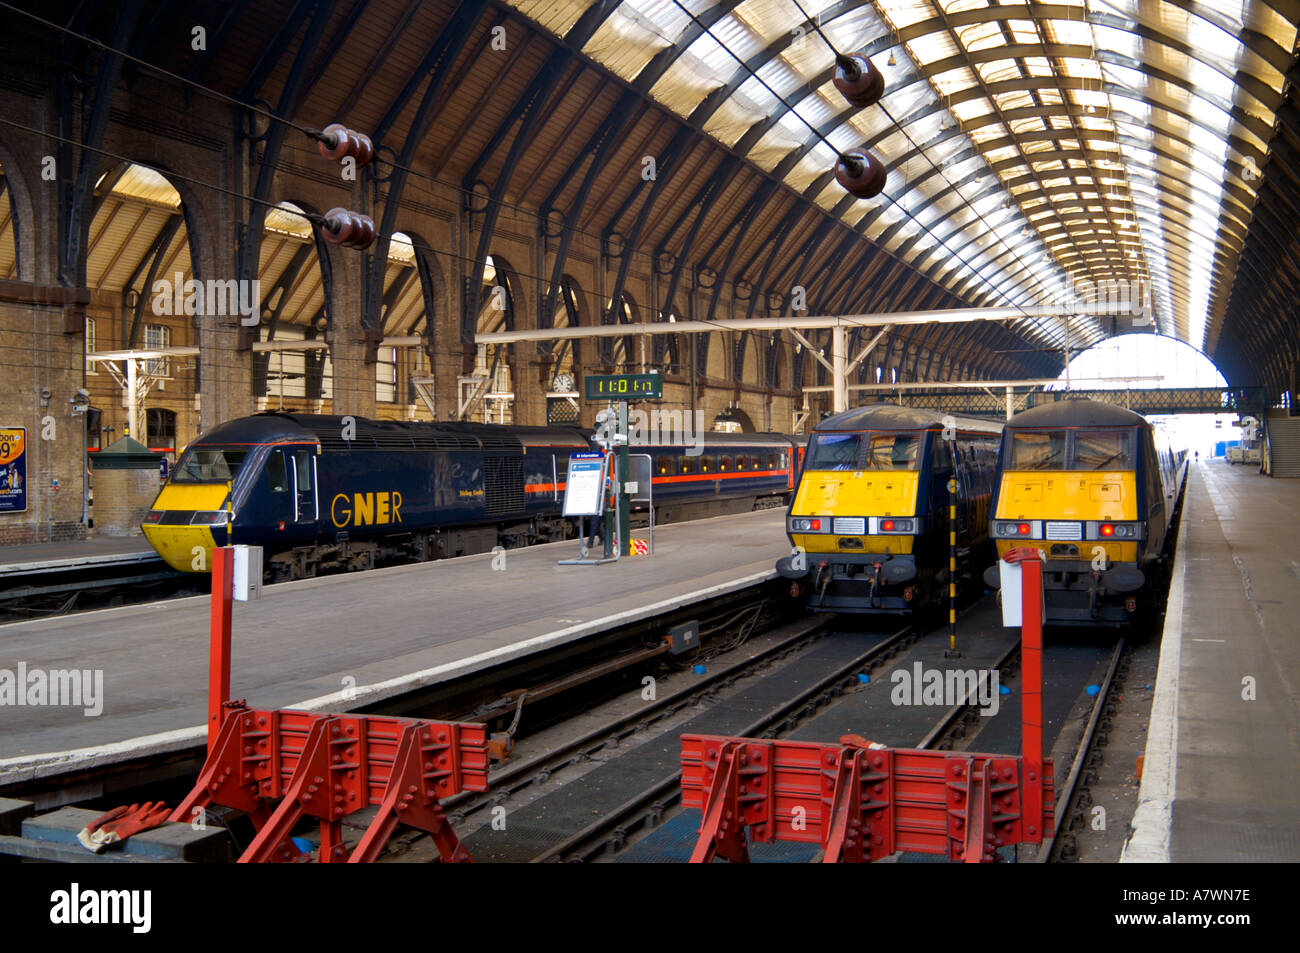 GNER diesel and electric trains Kings Cross railway station London England Stock Photo